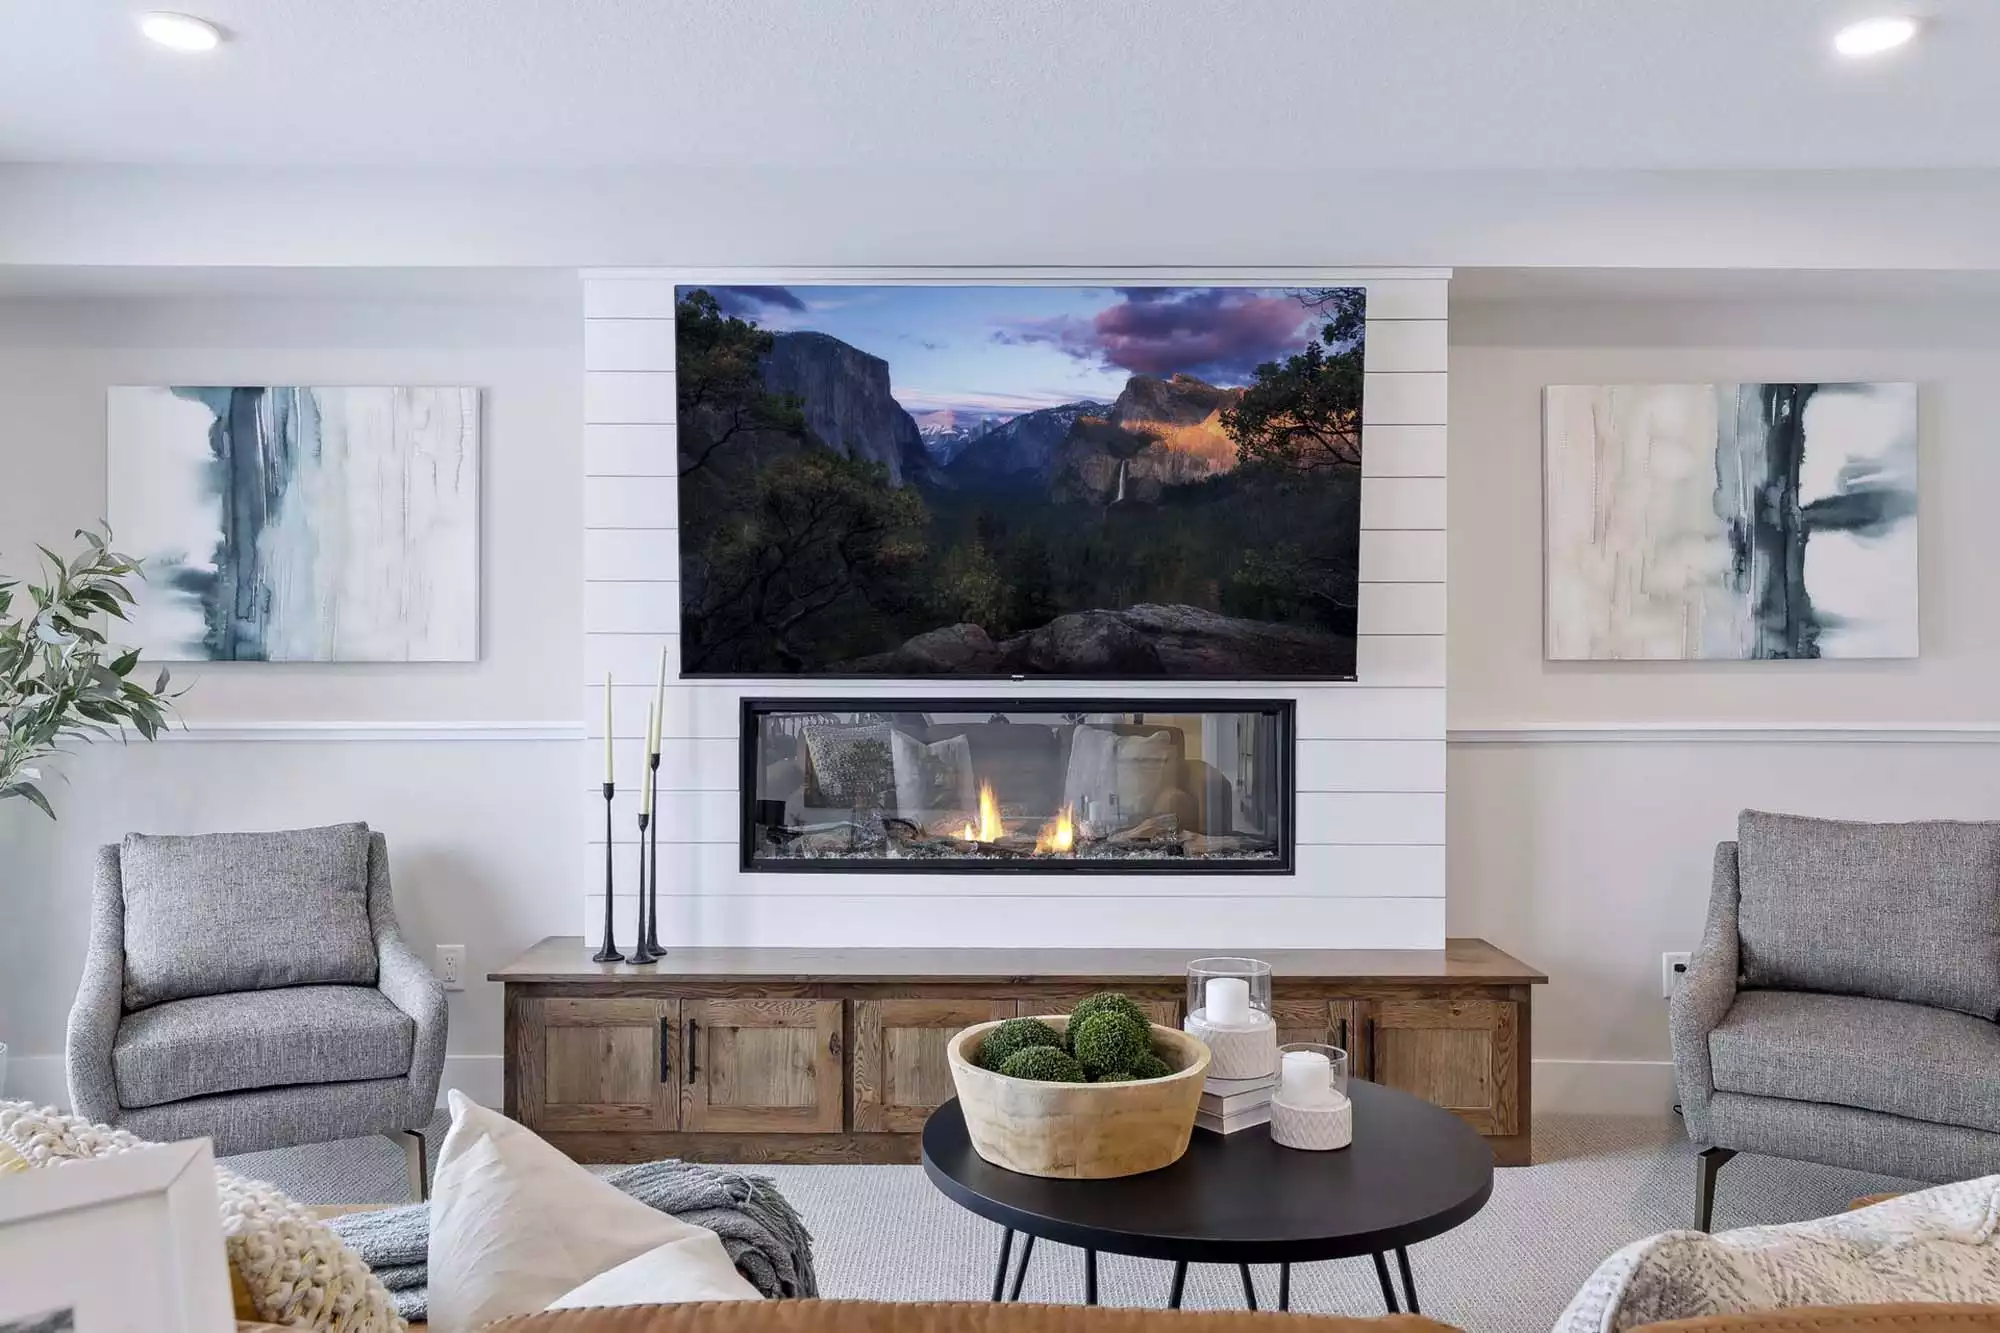 Fireplace and media wall